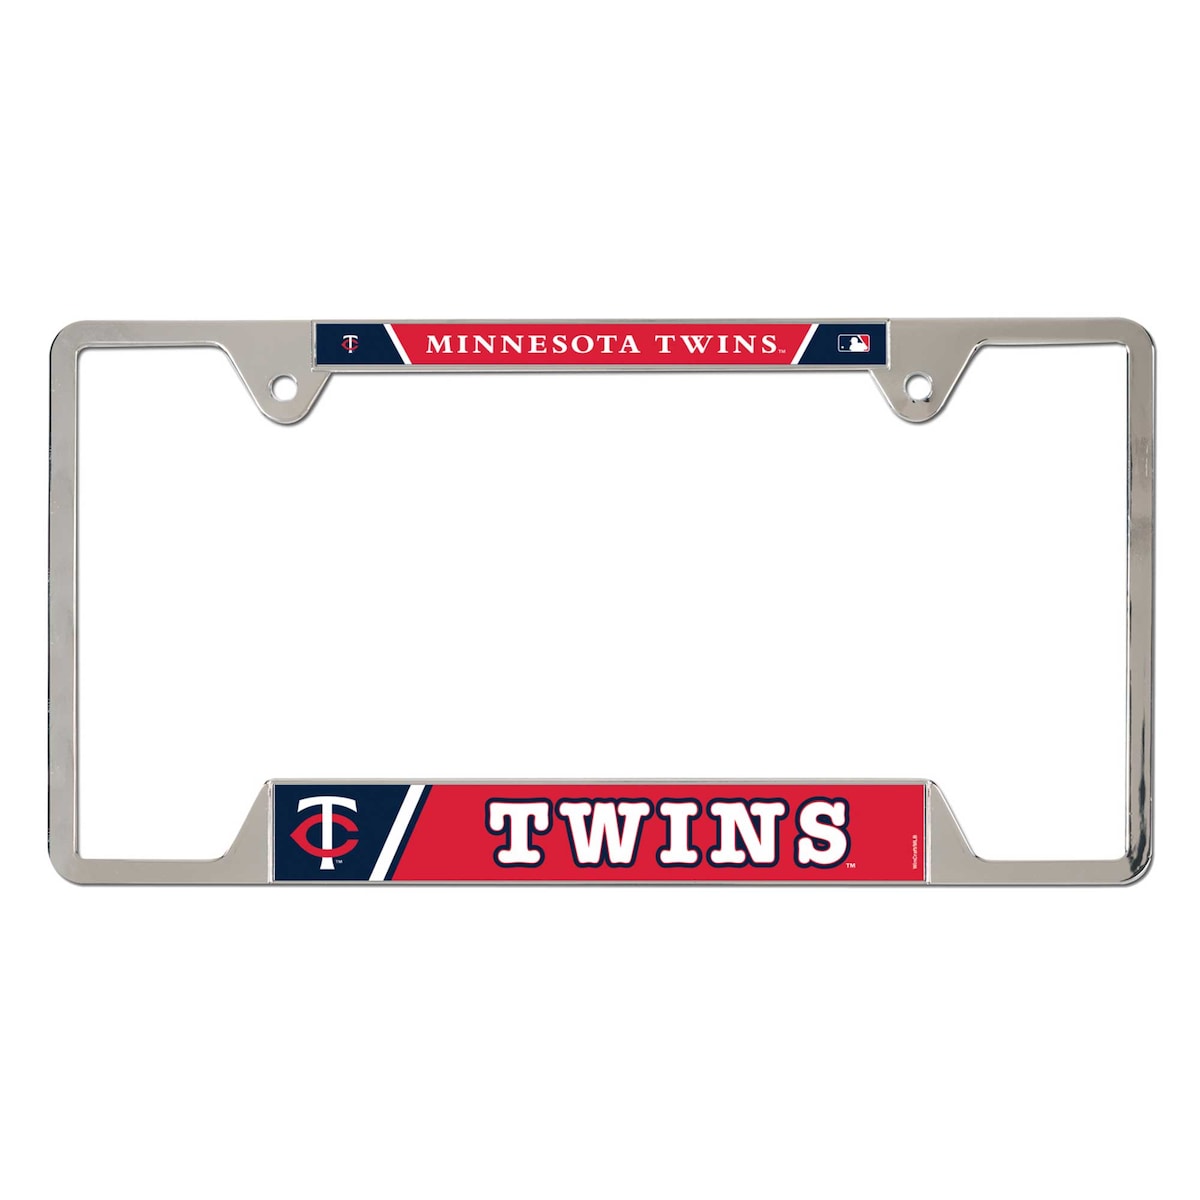 No matter where you drive, display your love for the Minnesota Twins with this Primary MVP license plate frame from WinCraft.Printed in the USAMade in the USAMeasures approx. 6" x 12"Officially licensedMaterial: 100% MetalBrand: WinCraftWipe clean with a damp clothTwo mounting holes (hardware not included)Printed graphics with acrylic overlayFits most standard-sized license plates